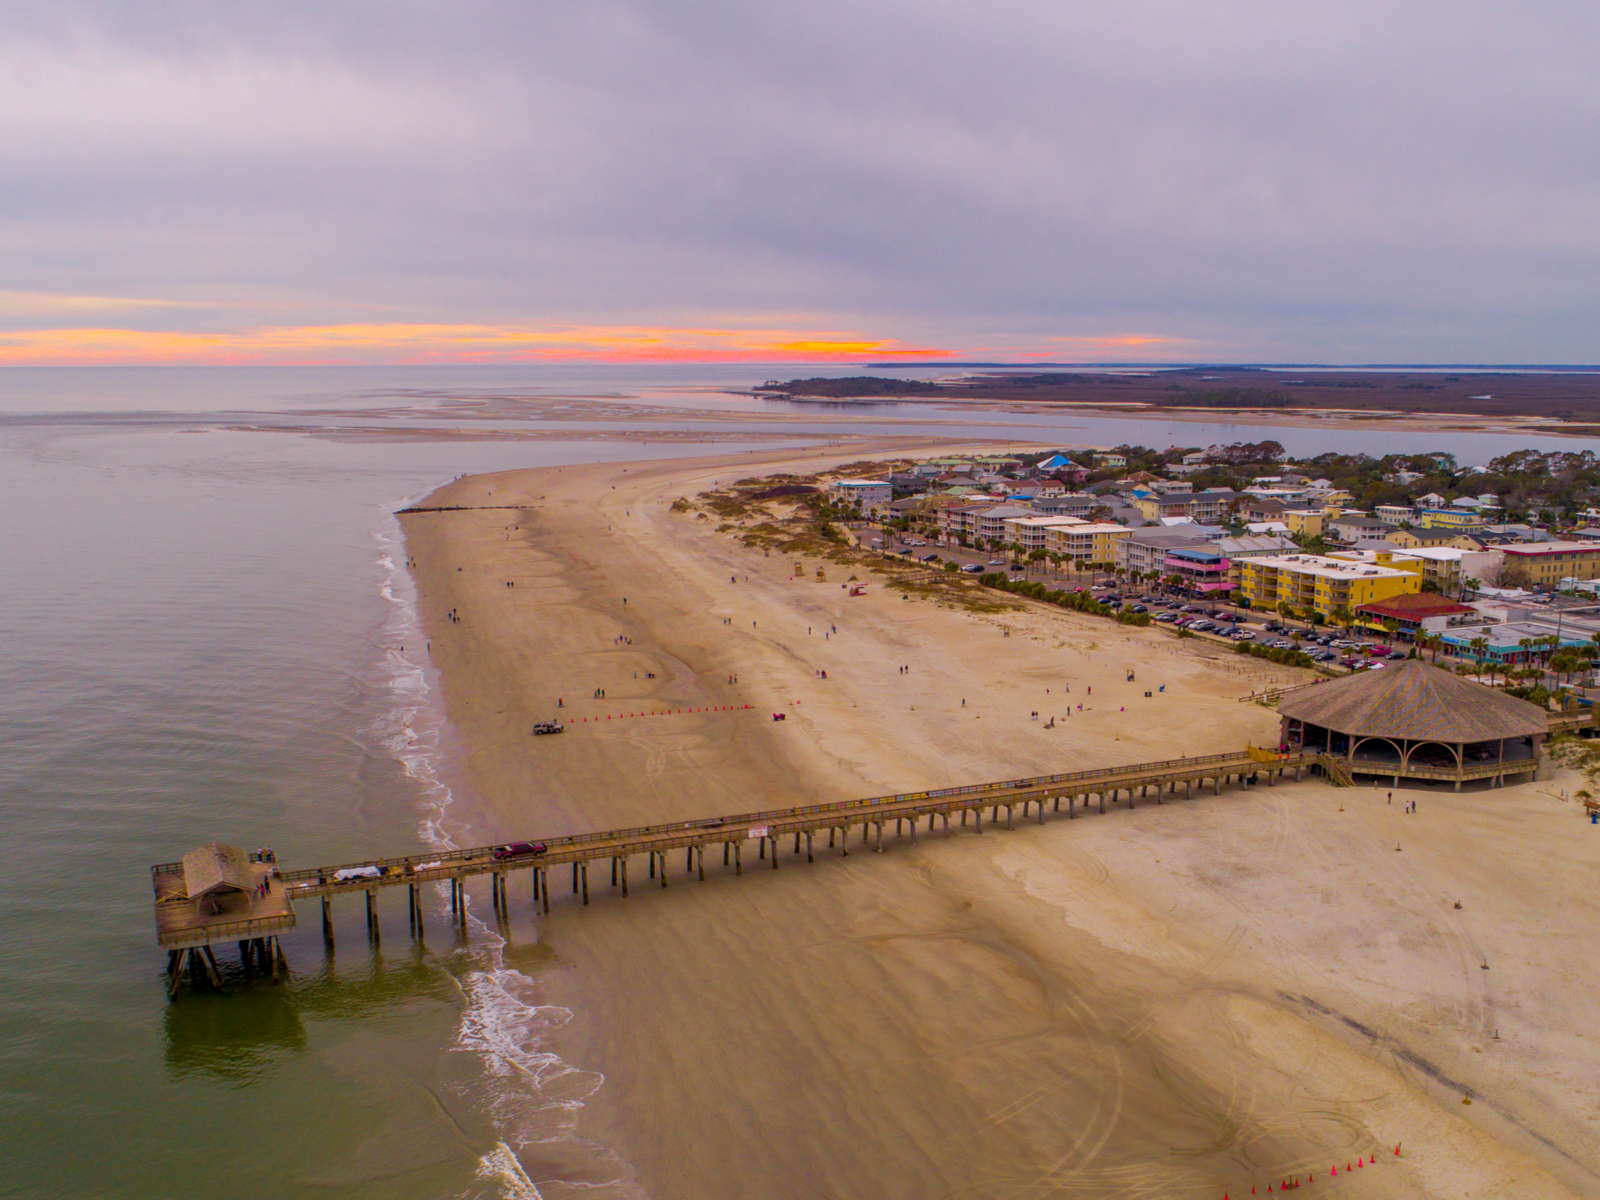 Aerial view of Tybee Island, one of the best beaches on the East Coast, pictured at dusk